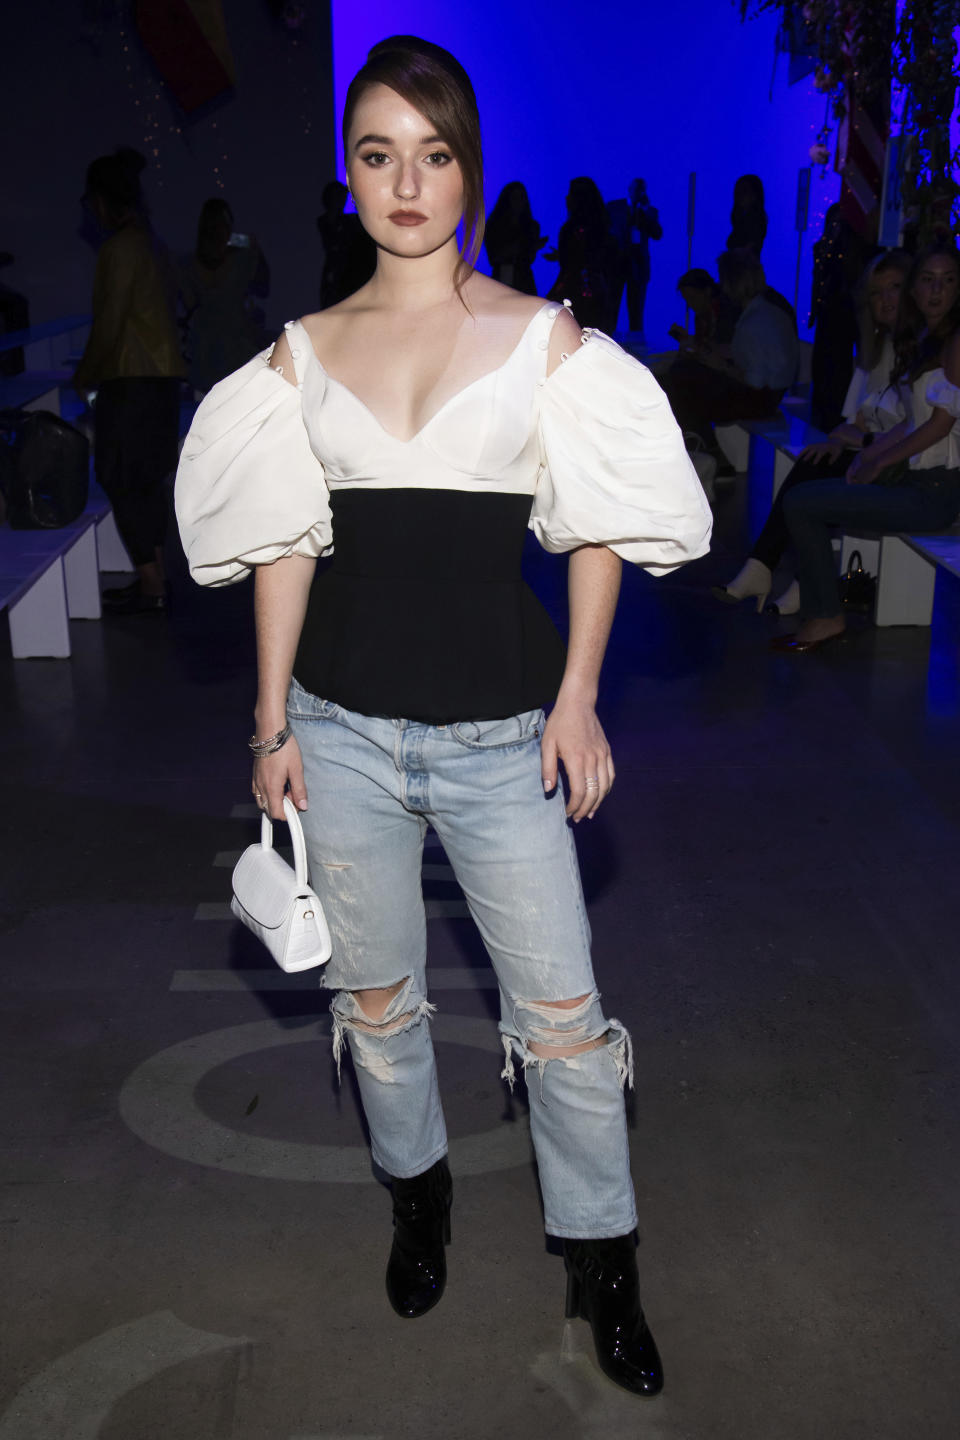 Kaitlyn Dever attends the Prabal Gurung show during Fashion Week on Sunday, Sept. 8, 2019 in New York. (Photo by Charles Sykes/Invision/AP)